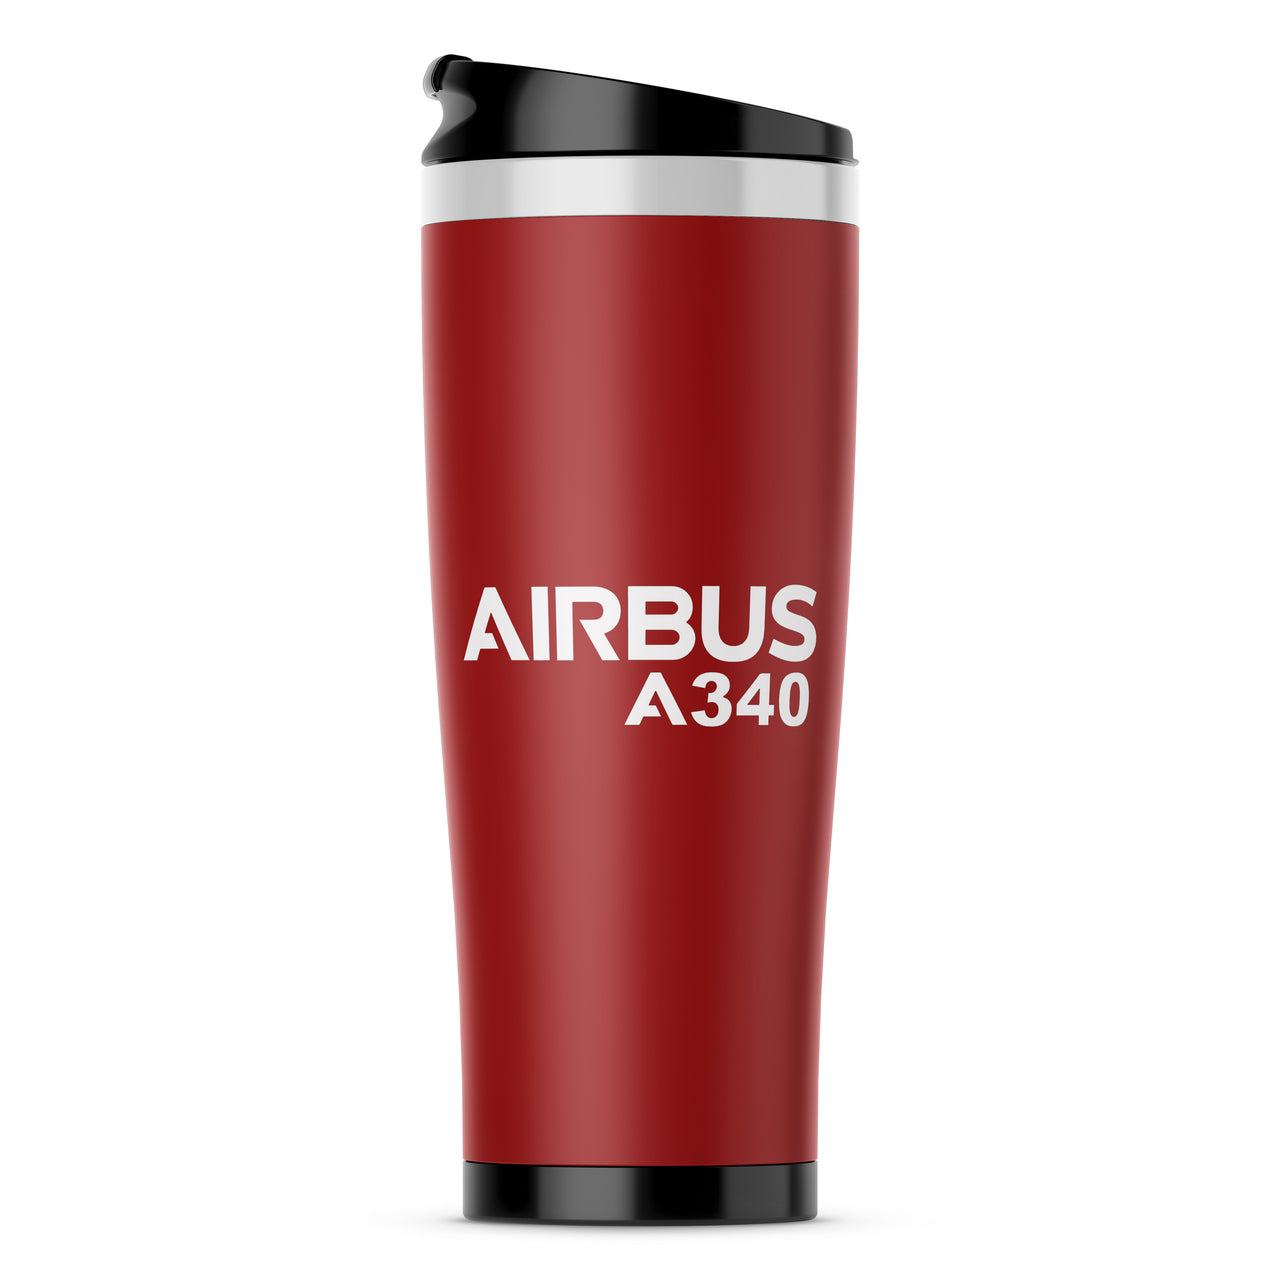 Airbus A340 & Text Designed Travel Mugs